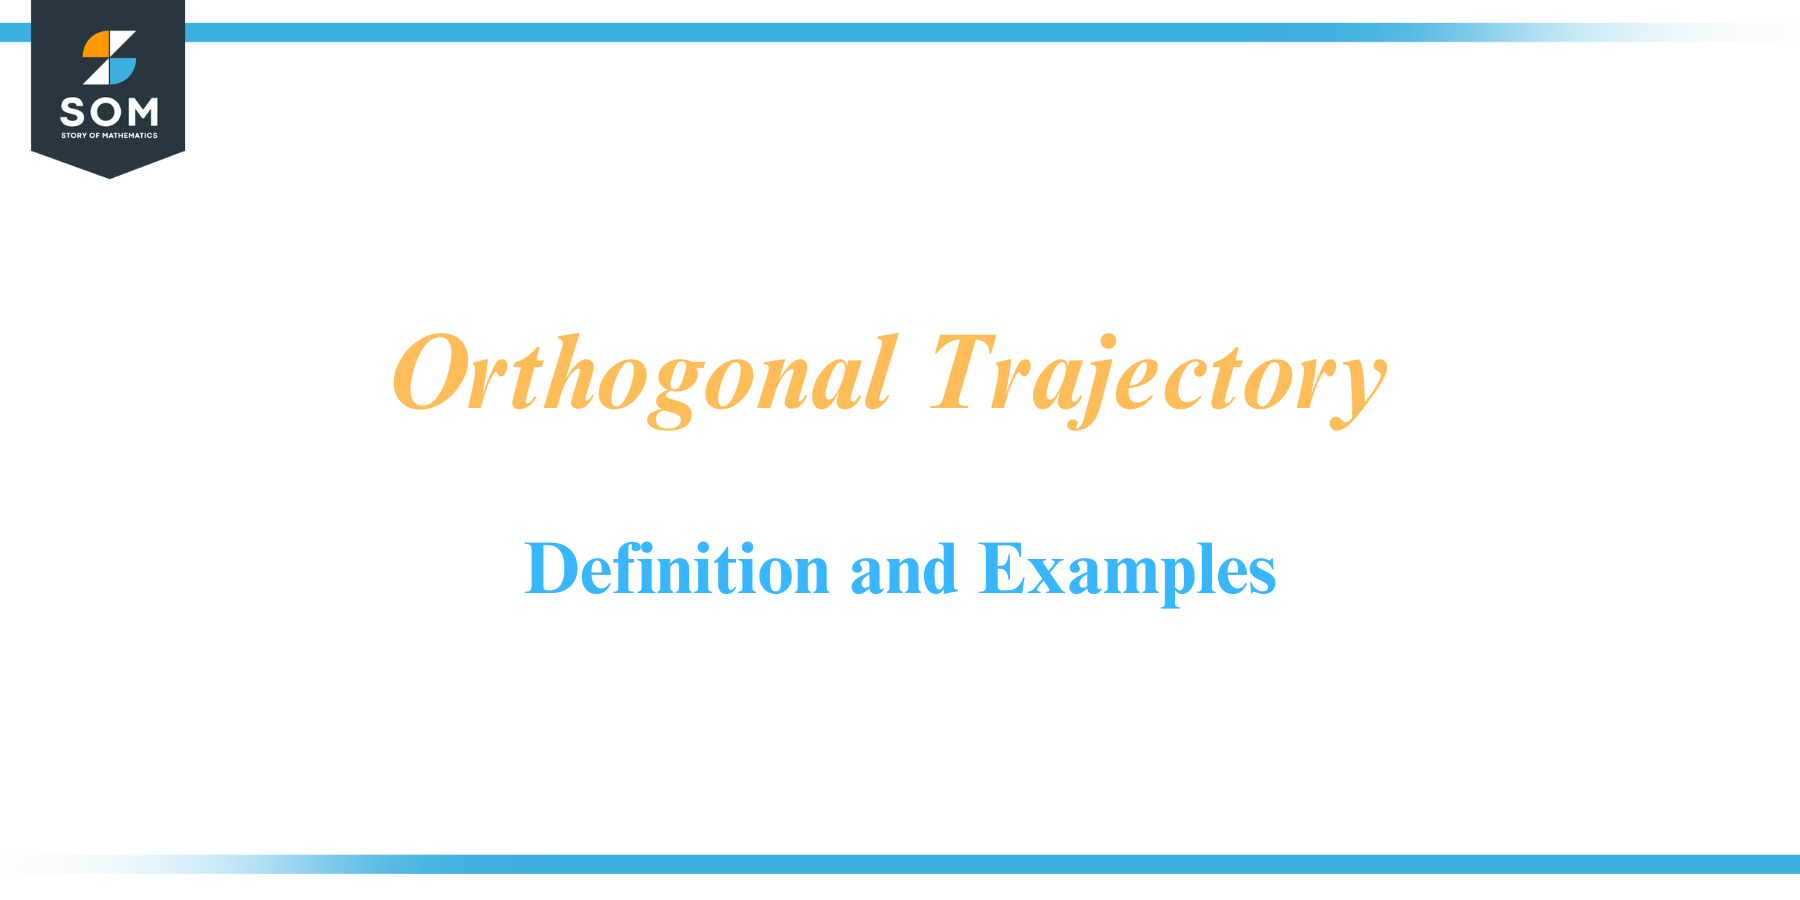 Orthogonal Trajectory Definition and